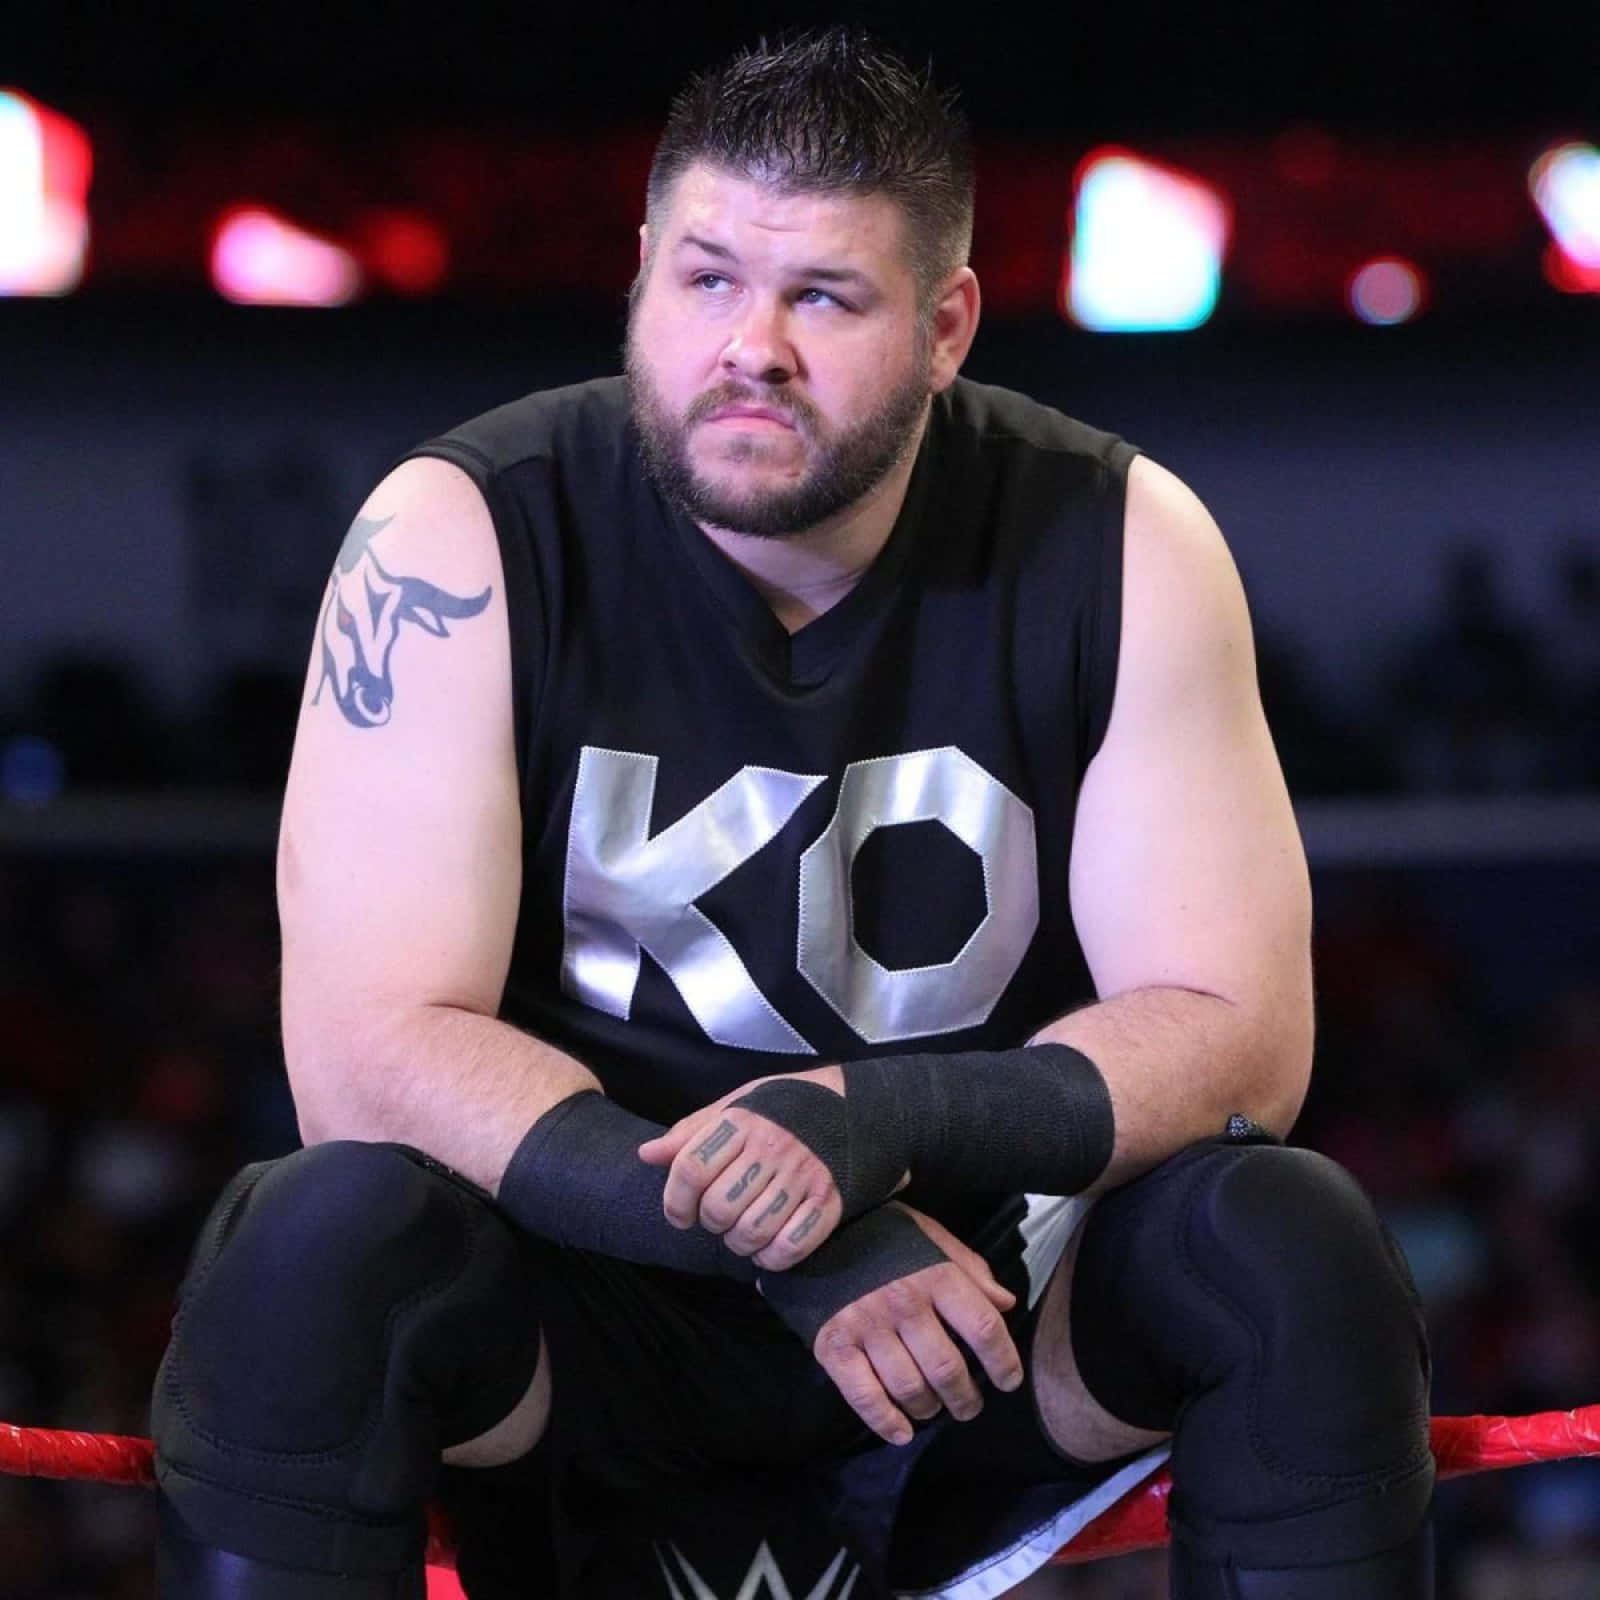 Thrilling Moment in the Ring with Kevin Owens Wallpaper